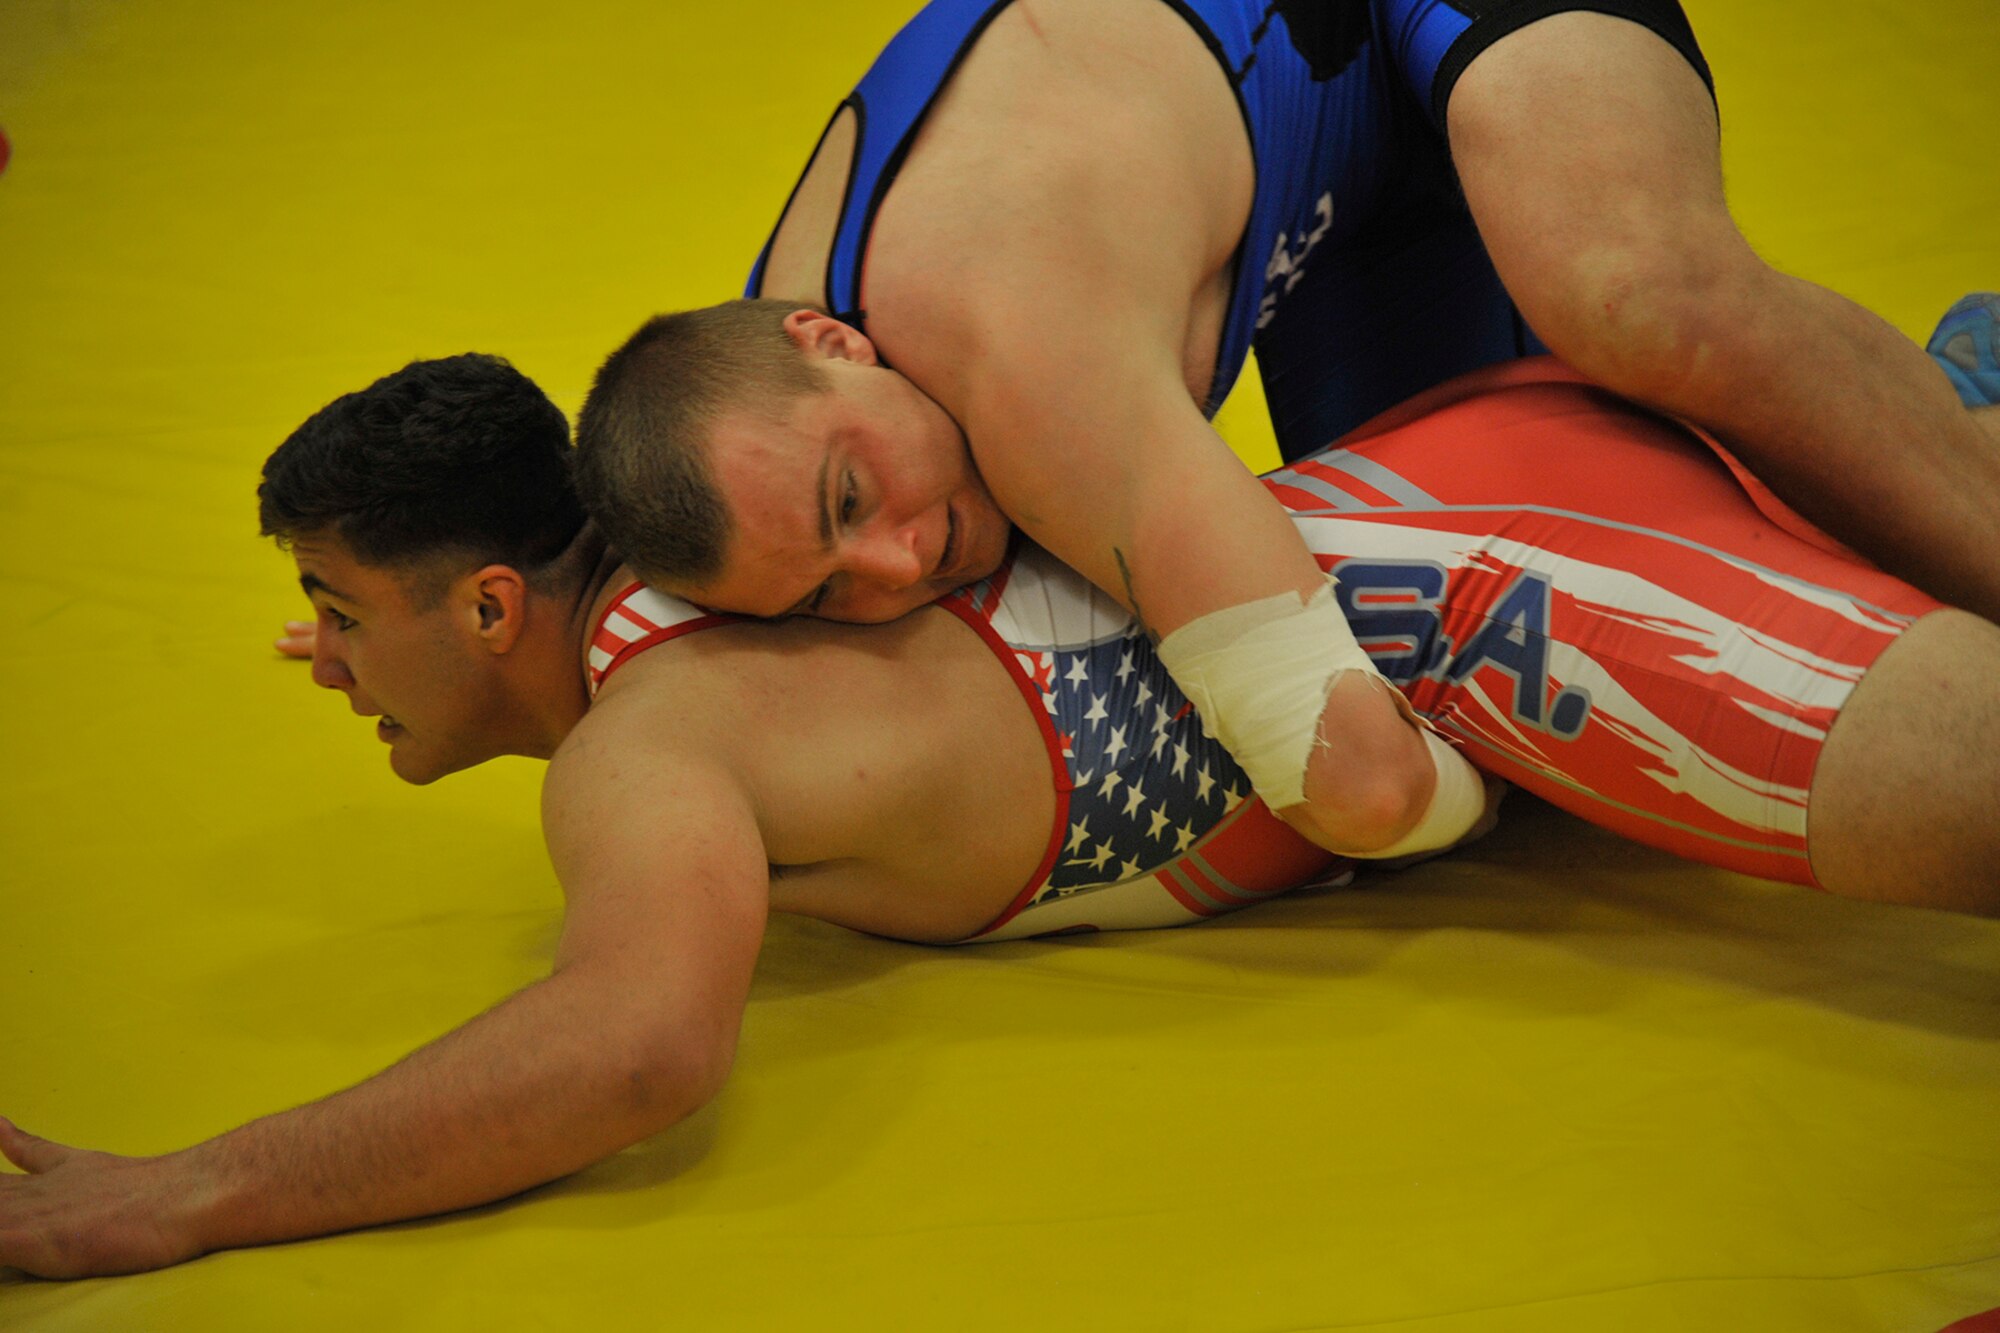 Airman 1st Class Eric Lapotsky works to roll his opponent during the 2015 Armed Forces Wrestling Championships at Fort Carson, Colorado, March 27. The two-day event pitted members from each branch of the Department of Defense against one another in Greco Roman and freestyle wrestling matches. Based out of Barksdale Air Force Base, Louisiana, and wrestling in the 214 lb. division, Lapotsky earned a gold in the freestyle event and silver in Greco-Roman wrestling.  (U.S. Air Force photo/Robb Lingley)